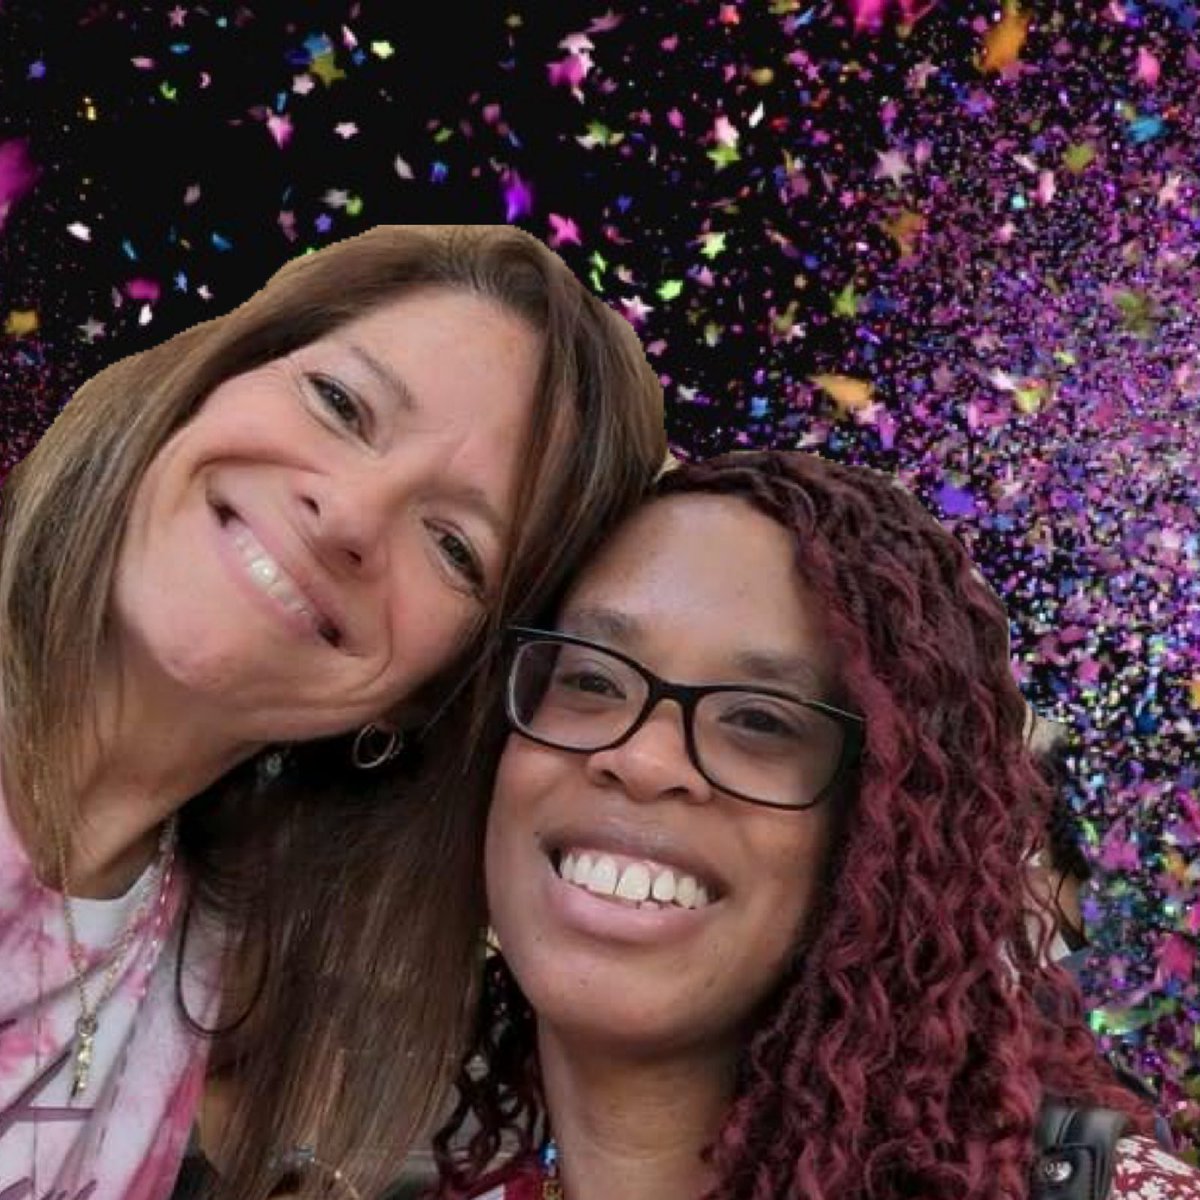 Cannot wait to be celebrating the Magic Summer Tour with my bestie Bonnie (@germain_bonnie). I really miss confetti. Cannot wait to have it rained down on me. @DonnieWahlberg